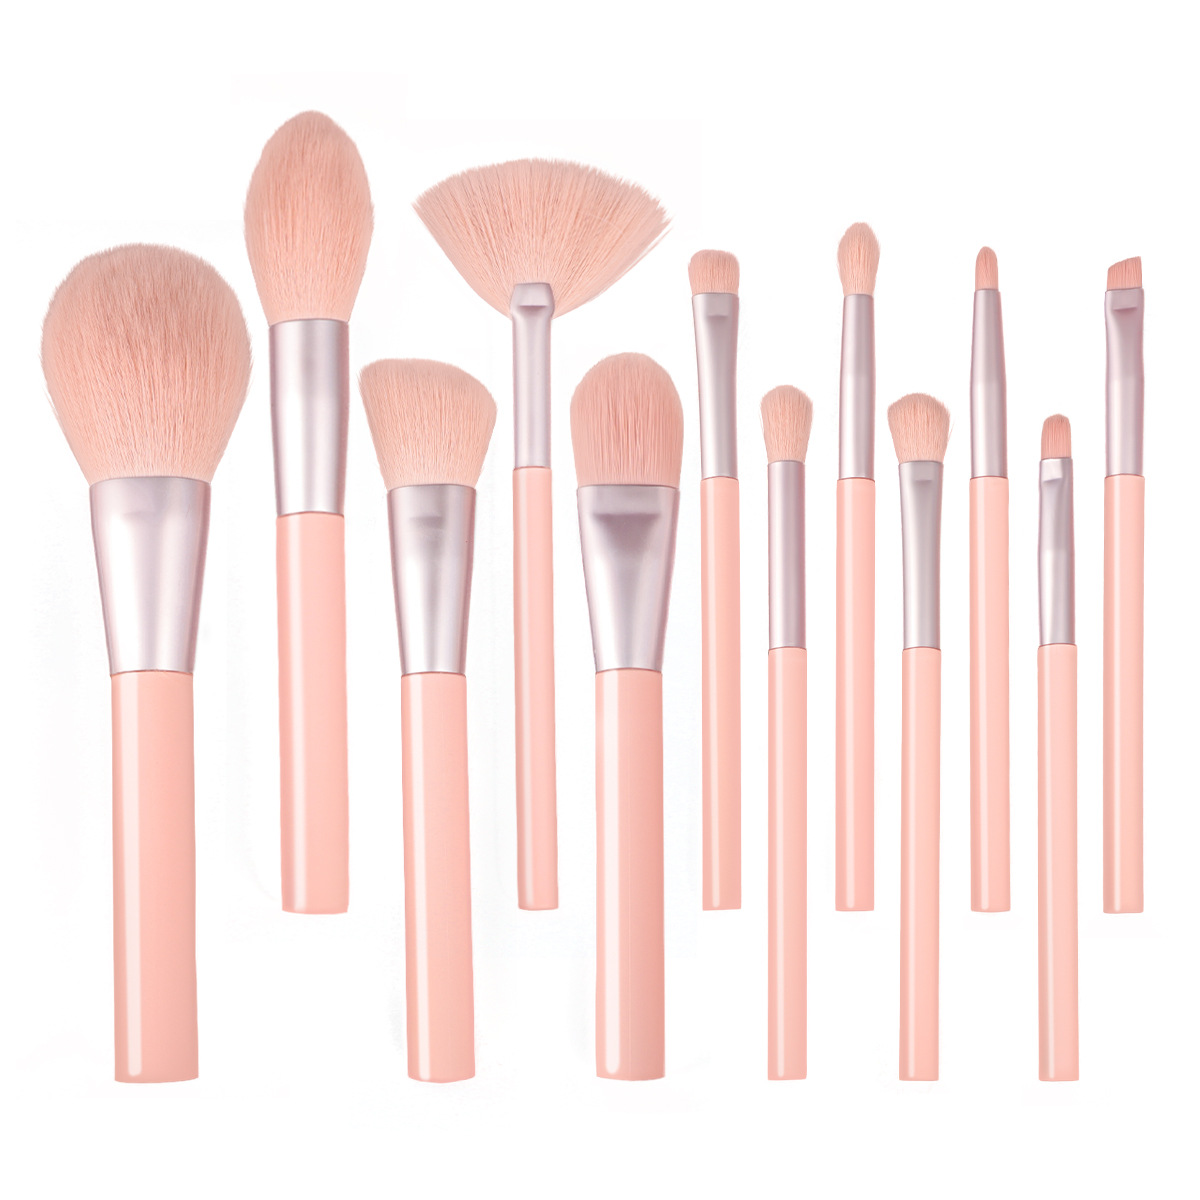 New Private Label 12Pcs Pink Makeup Brush Set Premium Soft Synthetic Hair Makeup Tools for Foundation Concealer Eyesh...